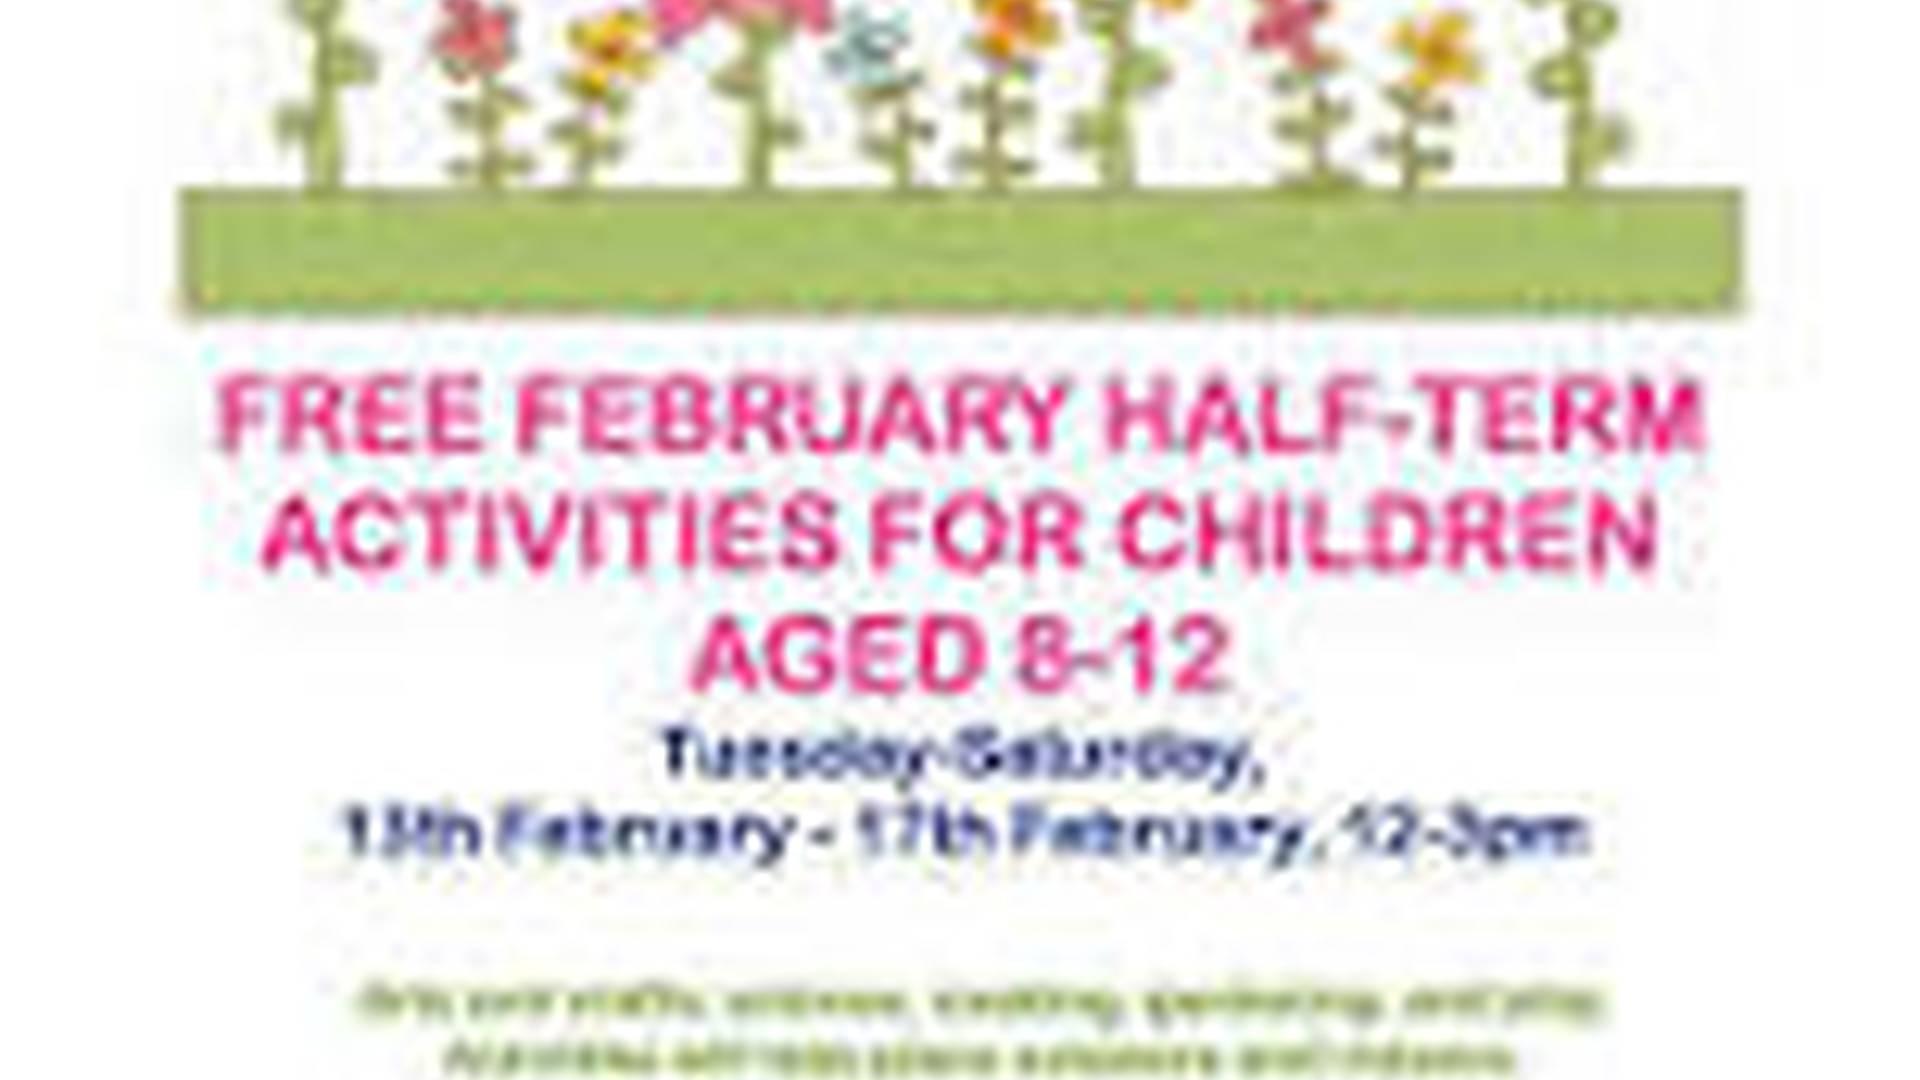 Free February Half-Term Play Scheme for Children Aged 8-12 photo